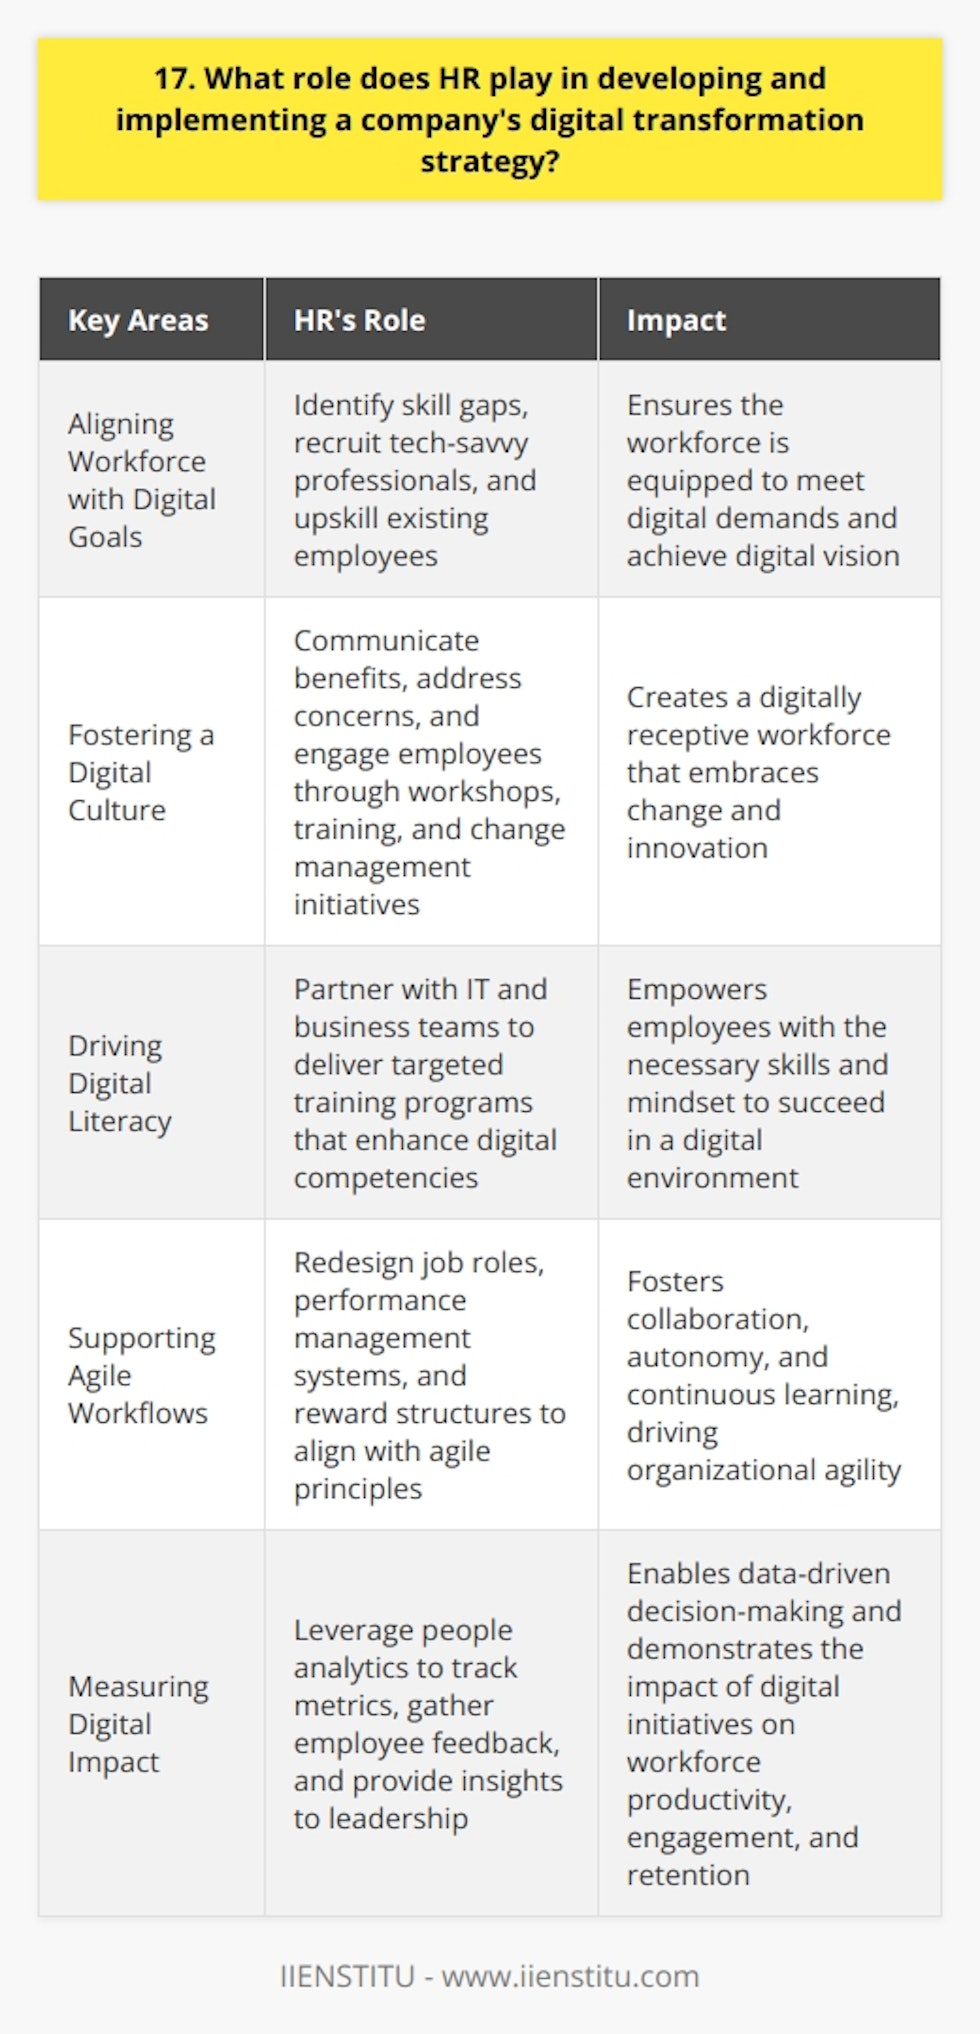 As an HR professional, I believe that we play a crucial role in shaping and executing a companys digital transformation strategy. Our involvement spans across several key areas: Aligning Workforce with Digital Goals We work closely with leadership to understand the digital vision and align talent acquisition and development accordingly. This means identifying skill gaps, recruiting tech-savvy professionals, and upskilling existing employees to meet digital demands. Fostering a Digital Culture HR is responsible for creating a culture that embraces digital change. We communicate the benefits of digital transformation, address concerns, and engage employees in the journey. Through workshops, training programs, and change management initiatives, we help build a digitally receptive workforce. Driving Digital Literacy To succeed in a digital environment, employees need the right skills and mindset. HR takes the lead in driving digital literacy across the organization. We partner with IT and business teams to deliver targeted training programs that enhance digital competencies. Supporting Agile Workflows Digital transformation often involves adopting agile methodologies. HR plays a vital role in supporting this shift by redesigning job roles, performance management systems, and reward structures to align with agile principles. We foster collaboration, autonomy, and continuous learning to drive agility. Measuring Digital Impact HR leverages people analytics to measure the impact of digital initiatives on workforce productivity, engagement, and retention. We track key metrics, gather employee feedback, and provide insights to leadership for data-driven decision-making. In my experience, Ive seen firsthand how HRs proactive involvement in digital transformation can make a significant difference. By aligning talent, fostering a digital culture, driving literacy, supporting agile workflows, and measuring impact, we become strategic partners in the companys digital journey.